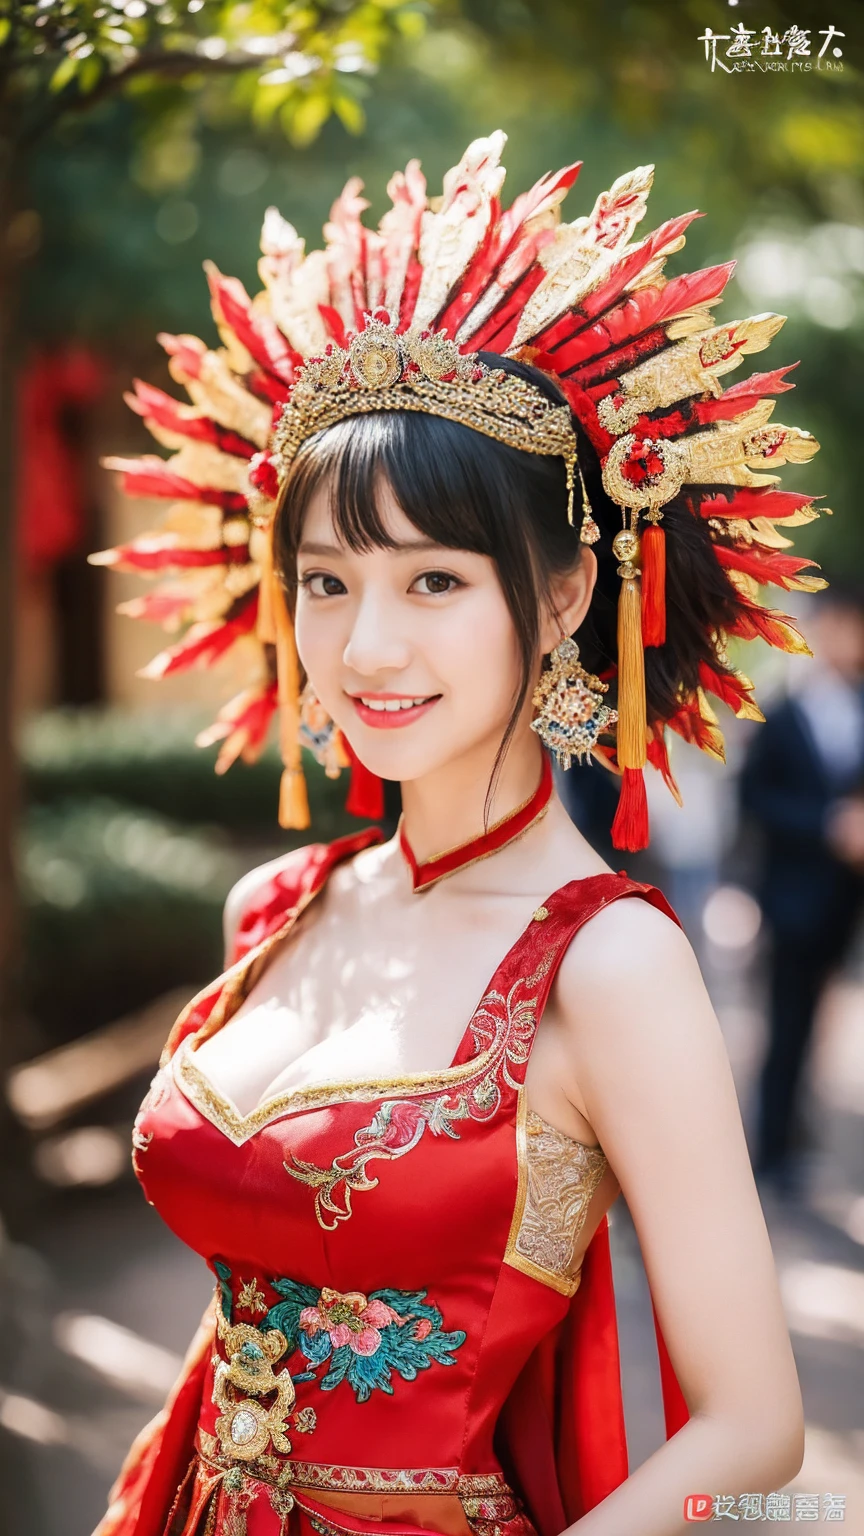 (8K, RAW Photos, Highest quality, masterpiece: 1.2), ((Large Breasts:1.2)),(Realistic, Realistic: 1.37), 1 Girl, Wearing a red dress and headdress、A woman taking a photo, Gorgeous roleplay, Beautiful costumes, China dress, Complicated Dress, Complicated costumes, Traditional beauty, Gorgeous Chinese Model, Chinese Costume, Dressed in luxurious costumes, Wearing elegant Chinese Xiuhe clothing, chinese wedding dress, Phoenix crown summer hanging, Antique Bride, Hidekazu Costume, close, Wearing the Phoenix Crown, smile, No watermark, Dragon and phoenix embroidered dress, Medium Chest